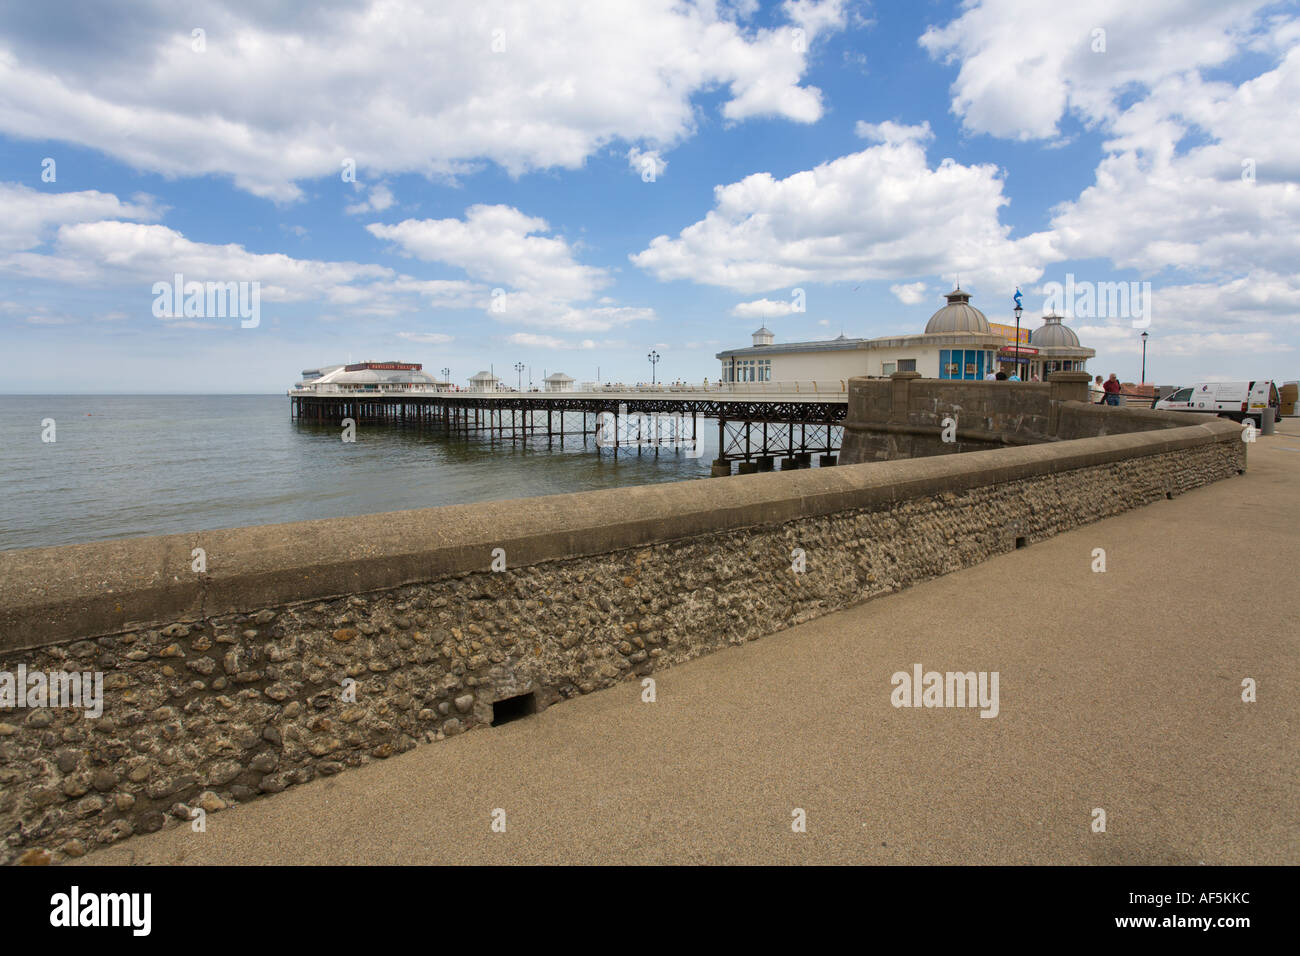 The Pier at Great Yarmouth Norfolk England Stock Photo